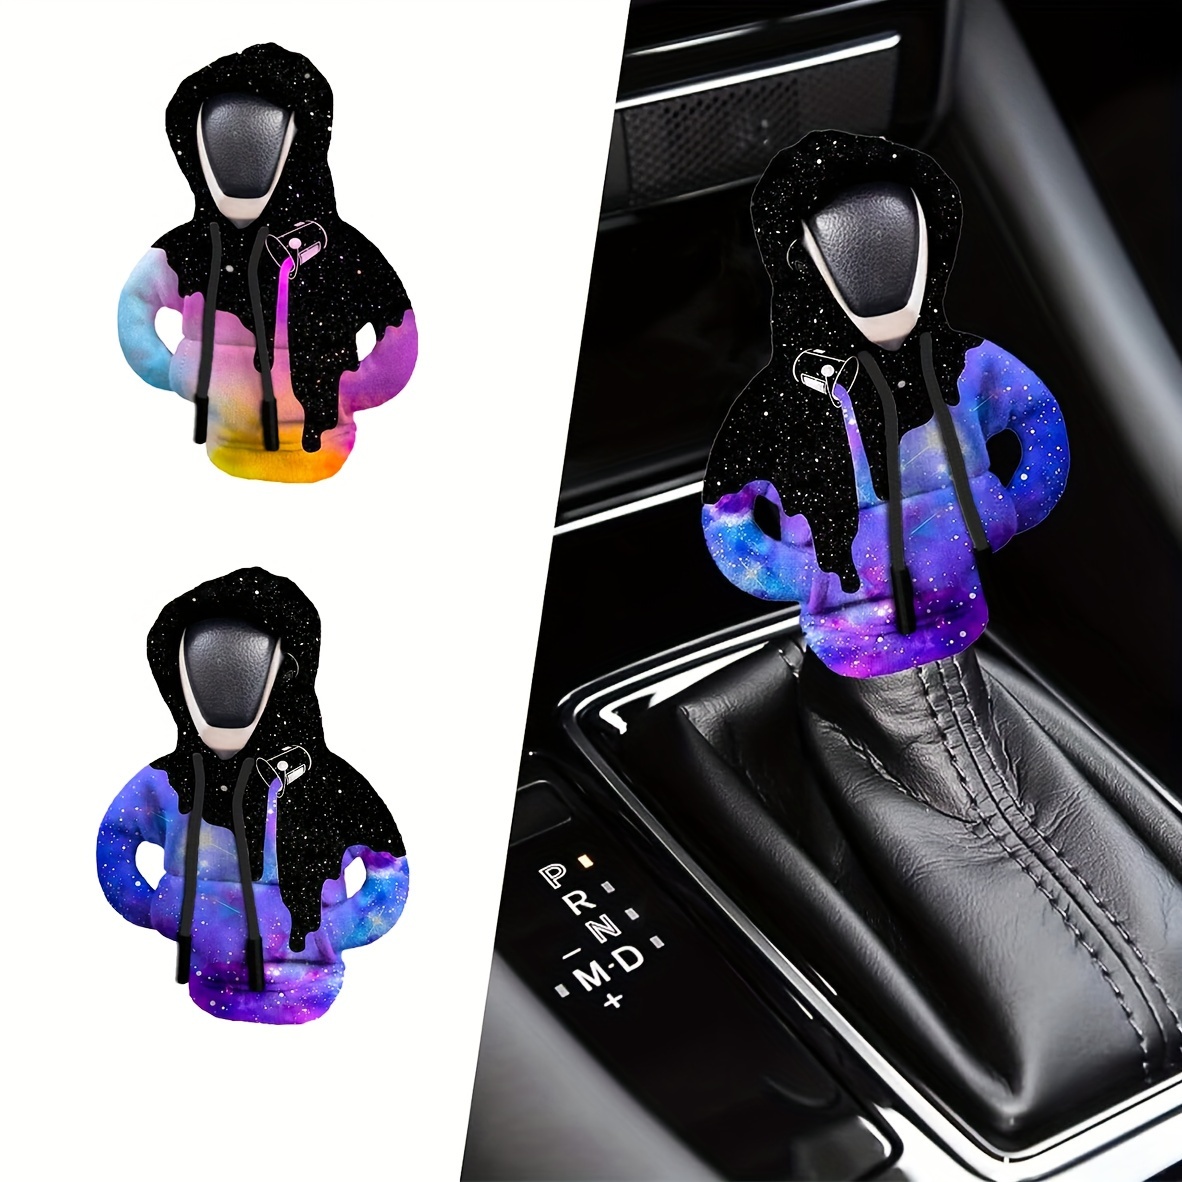 

Car Gearshift Cover, Winter Warmth Shift Knob Cover, Sweater Shirt, Automotive Interior Novel Accessories, Universal Fit Knob Cover, Ideal Gift